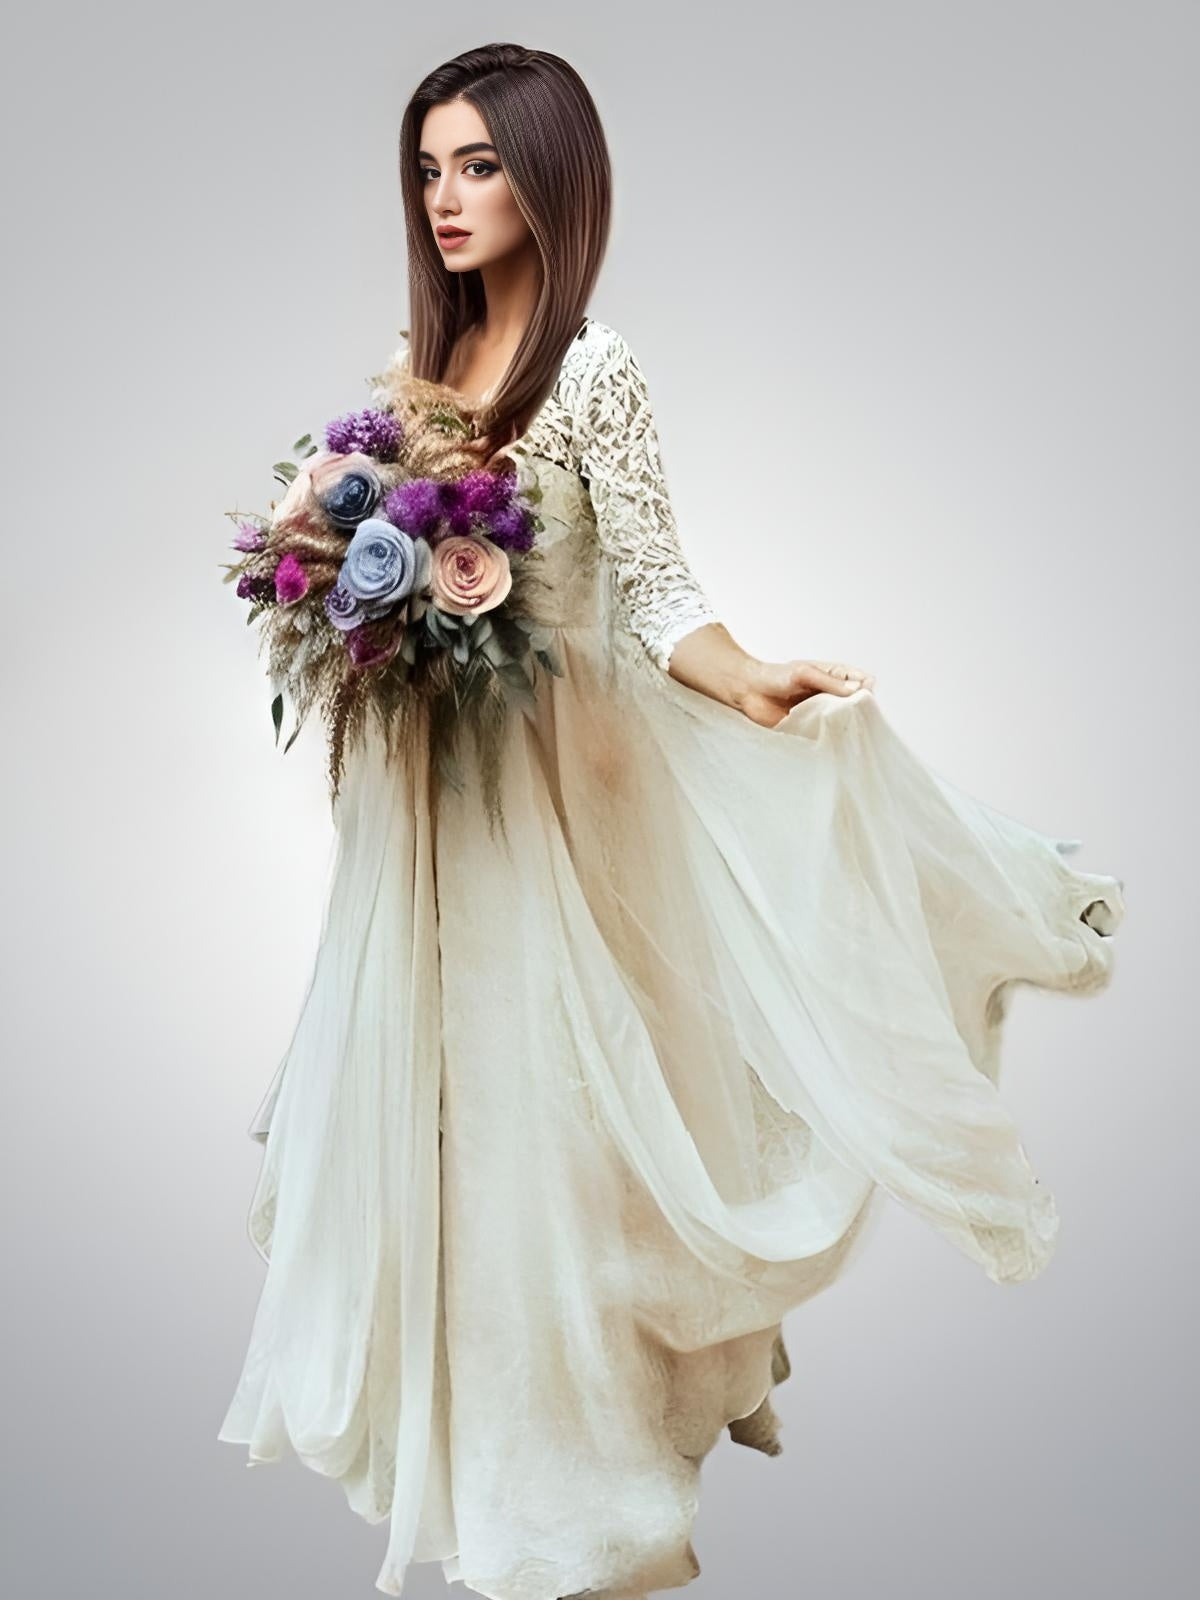 A bride in beautiful Boho Two-Piece Wedding Dress, featuring a full chiffon skirt and lace top, holding flower bouquet